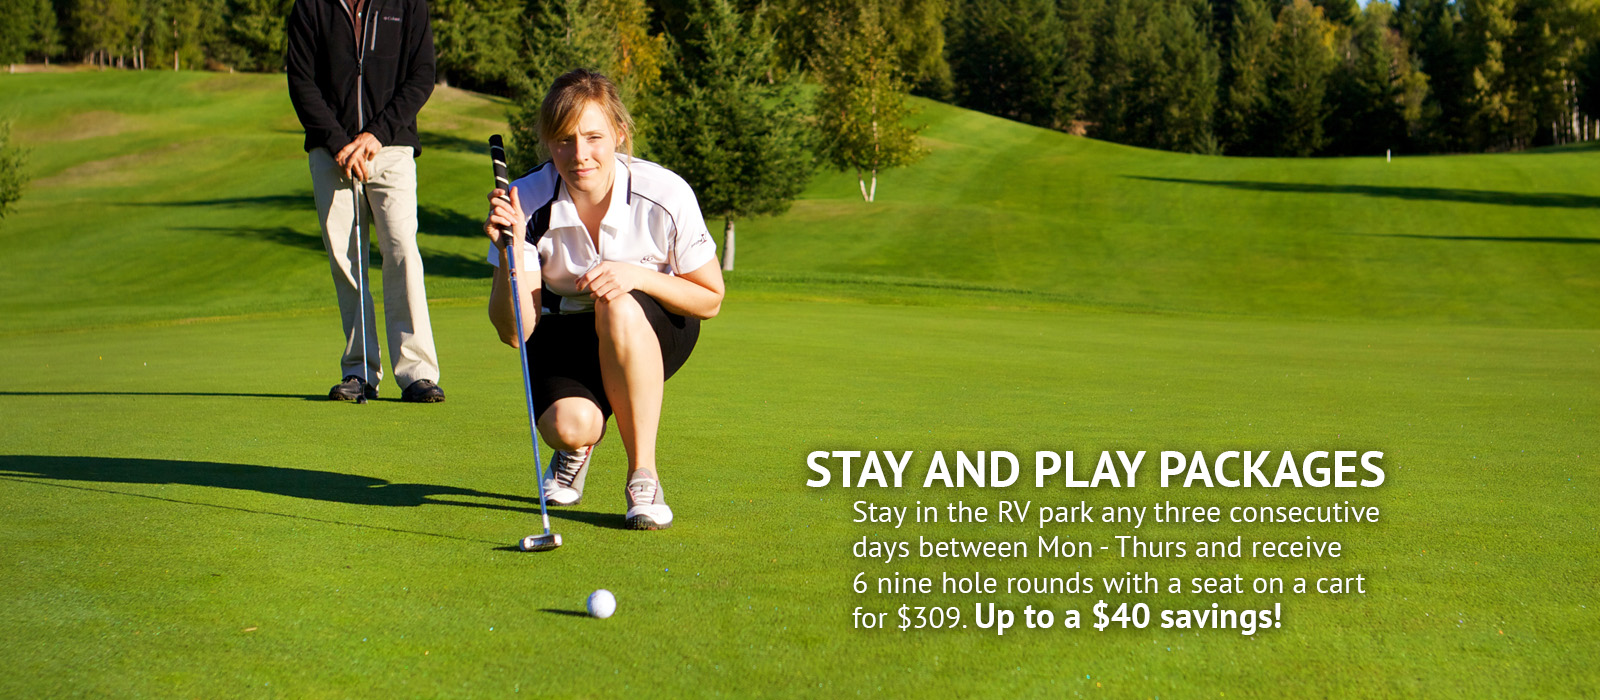 Stay and play packages